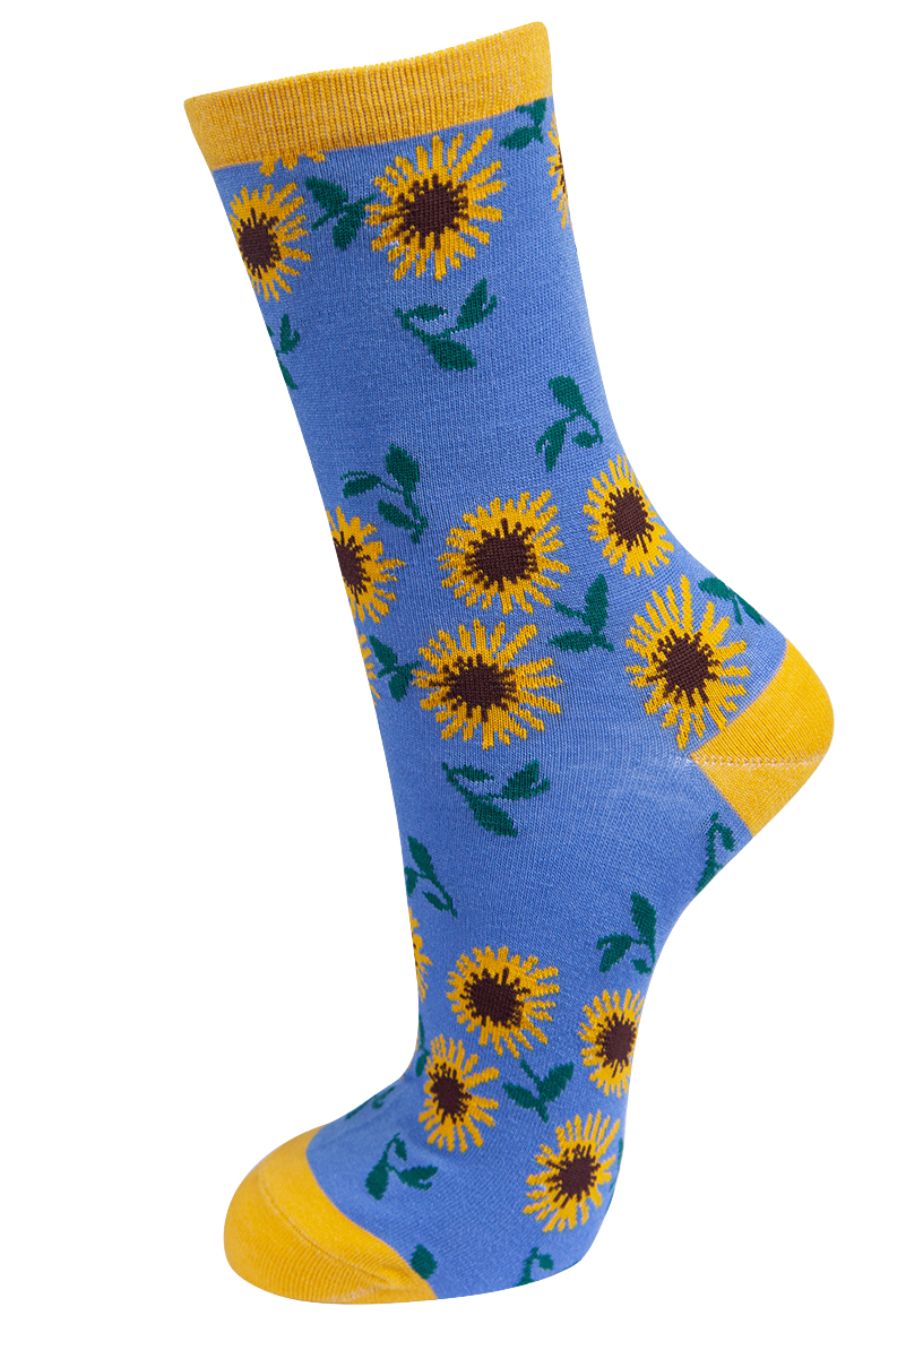 blue ankle socks with an all over yellow sunflower pattern